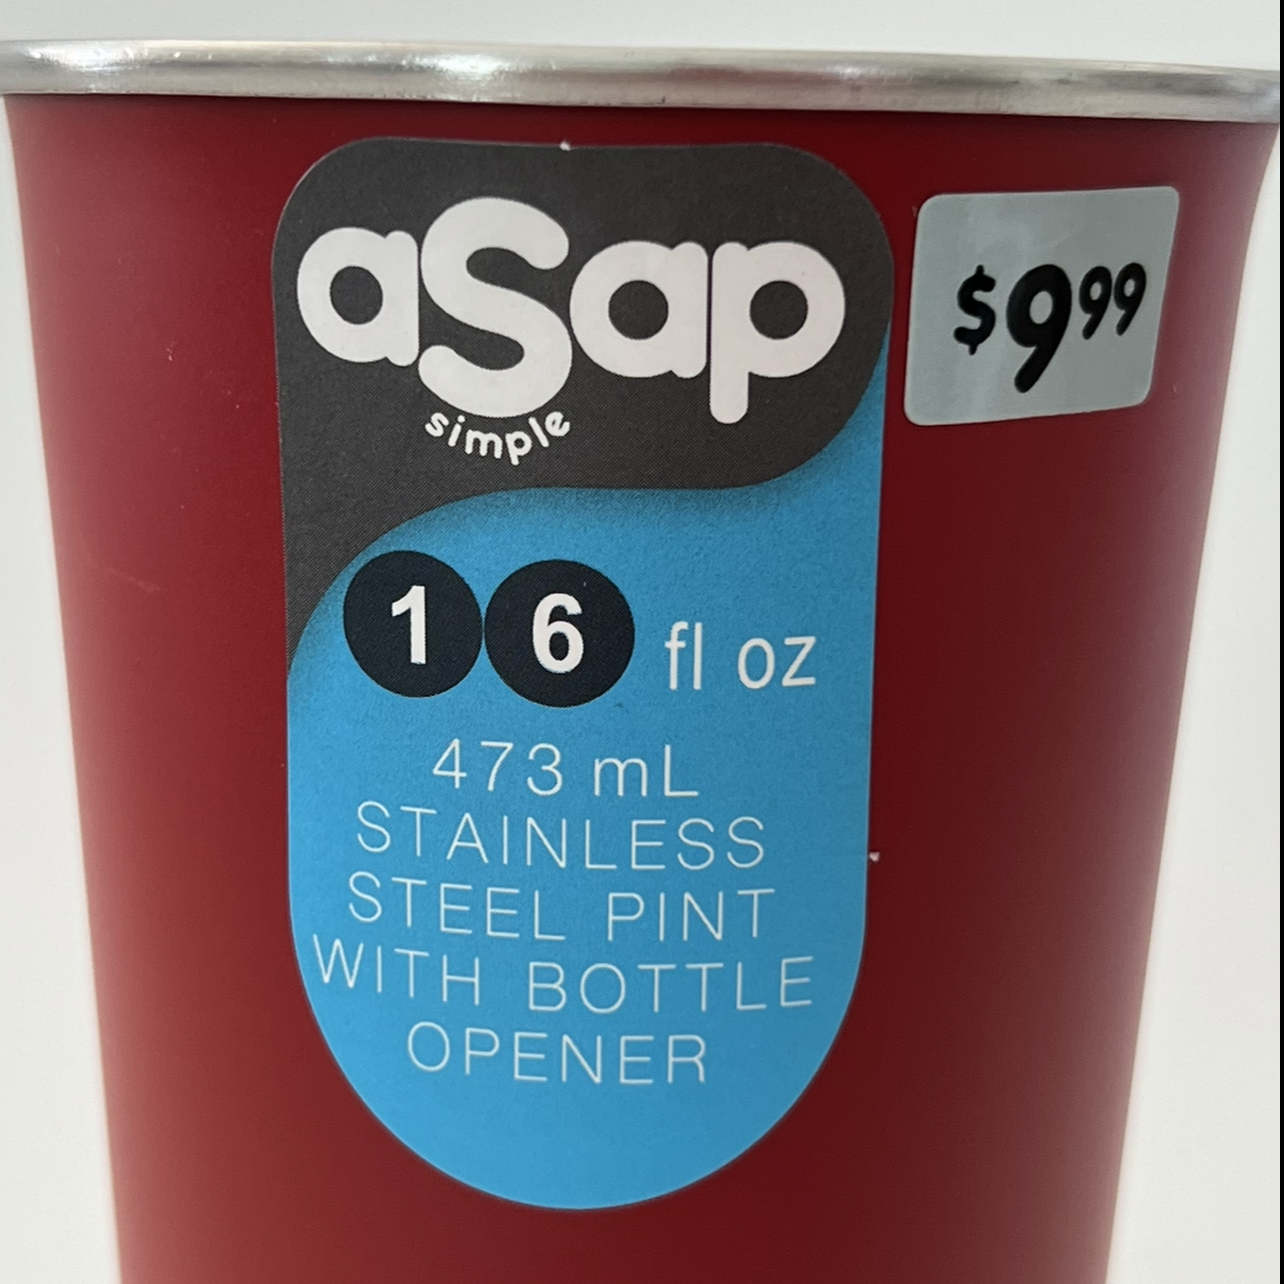 Stainless Steel 16 oz Cup ASAP Simple with Bottle Opener 473 mL Red